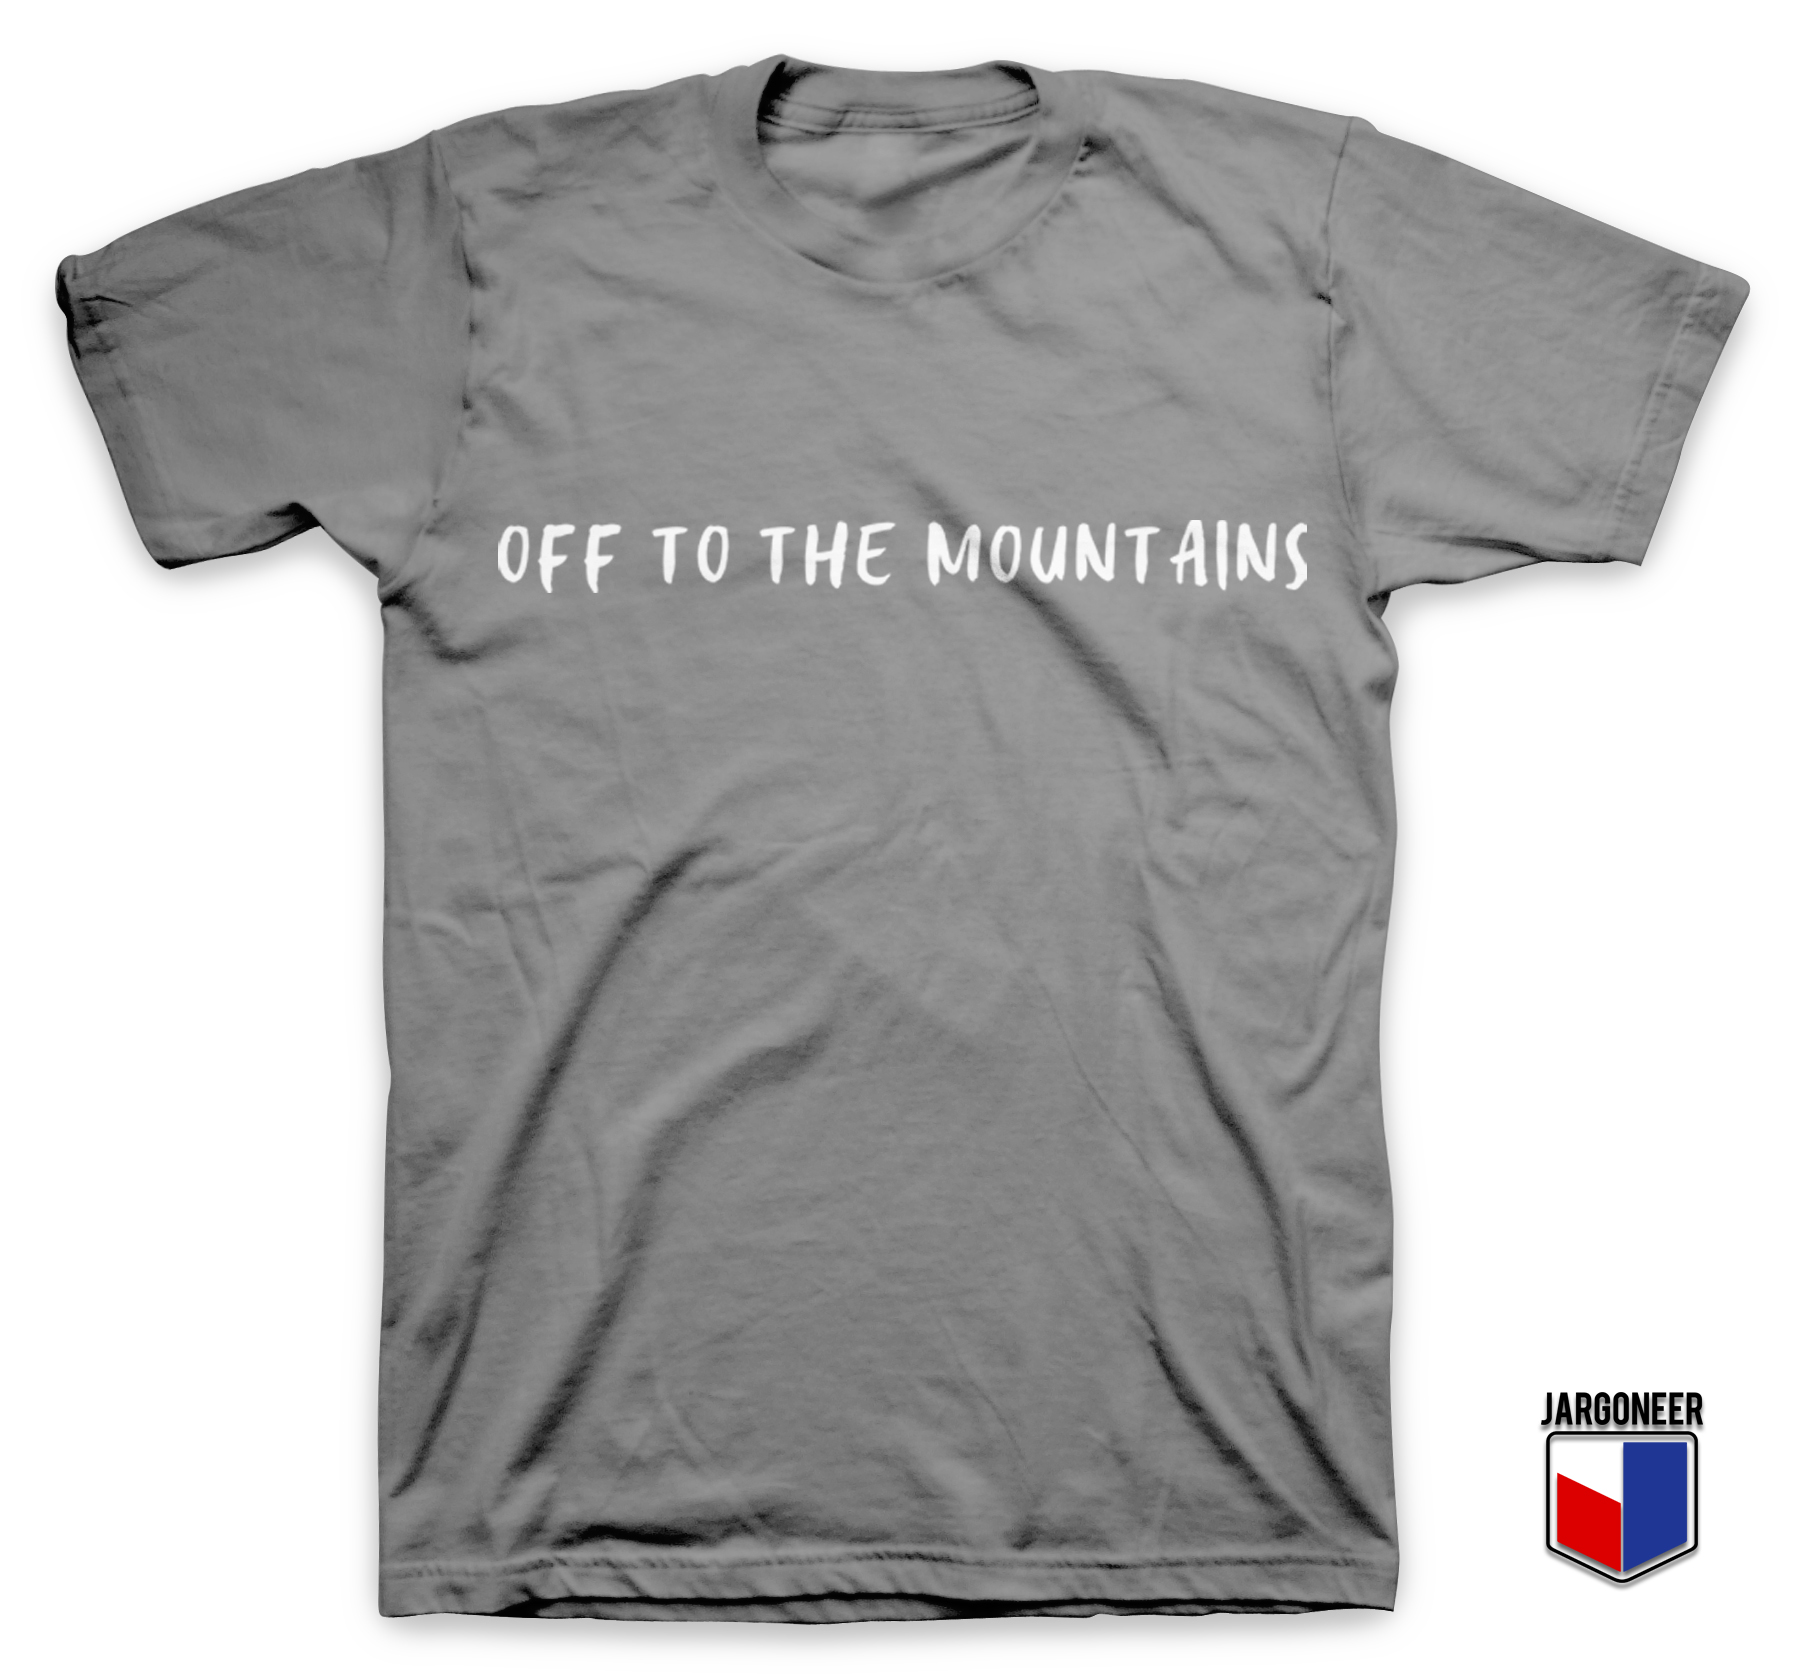 Off To The Mountains Grey Tshirt - Shop Unique Graphic Cool Shirt Designs